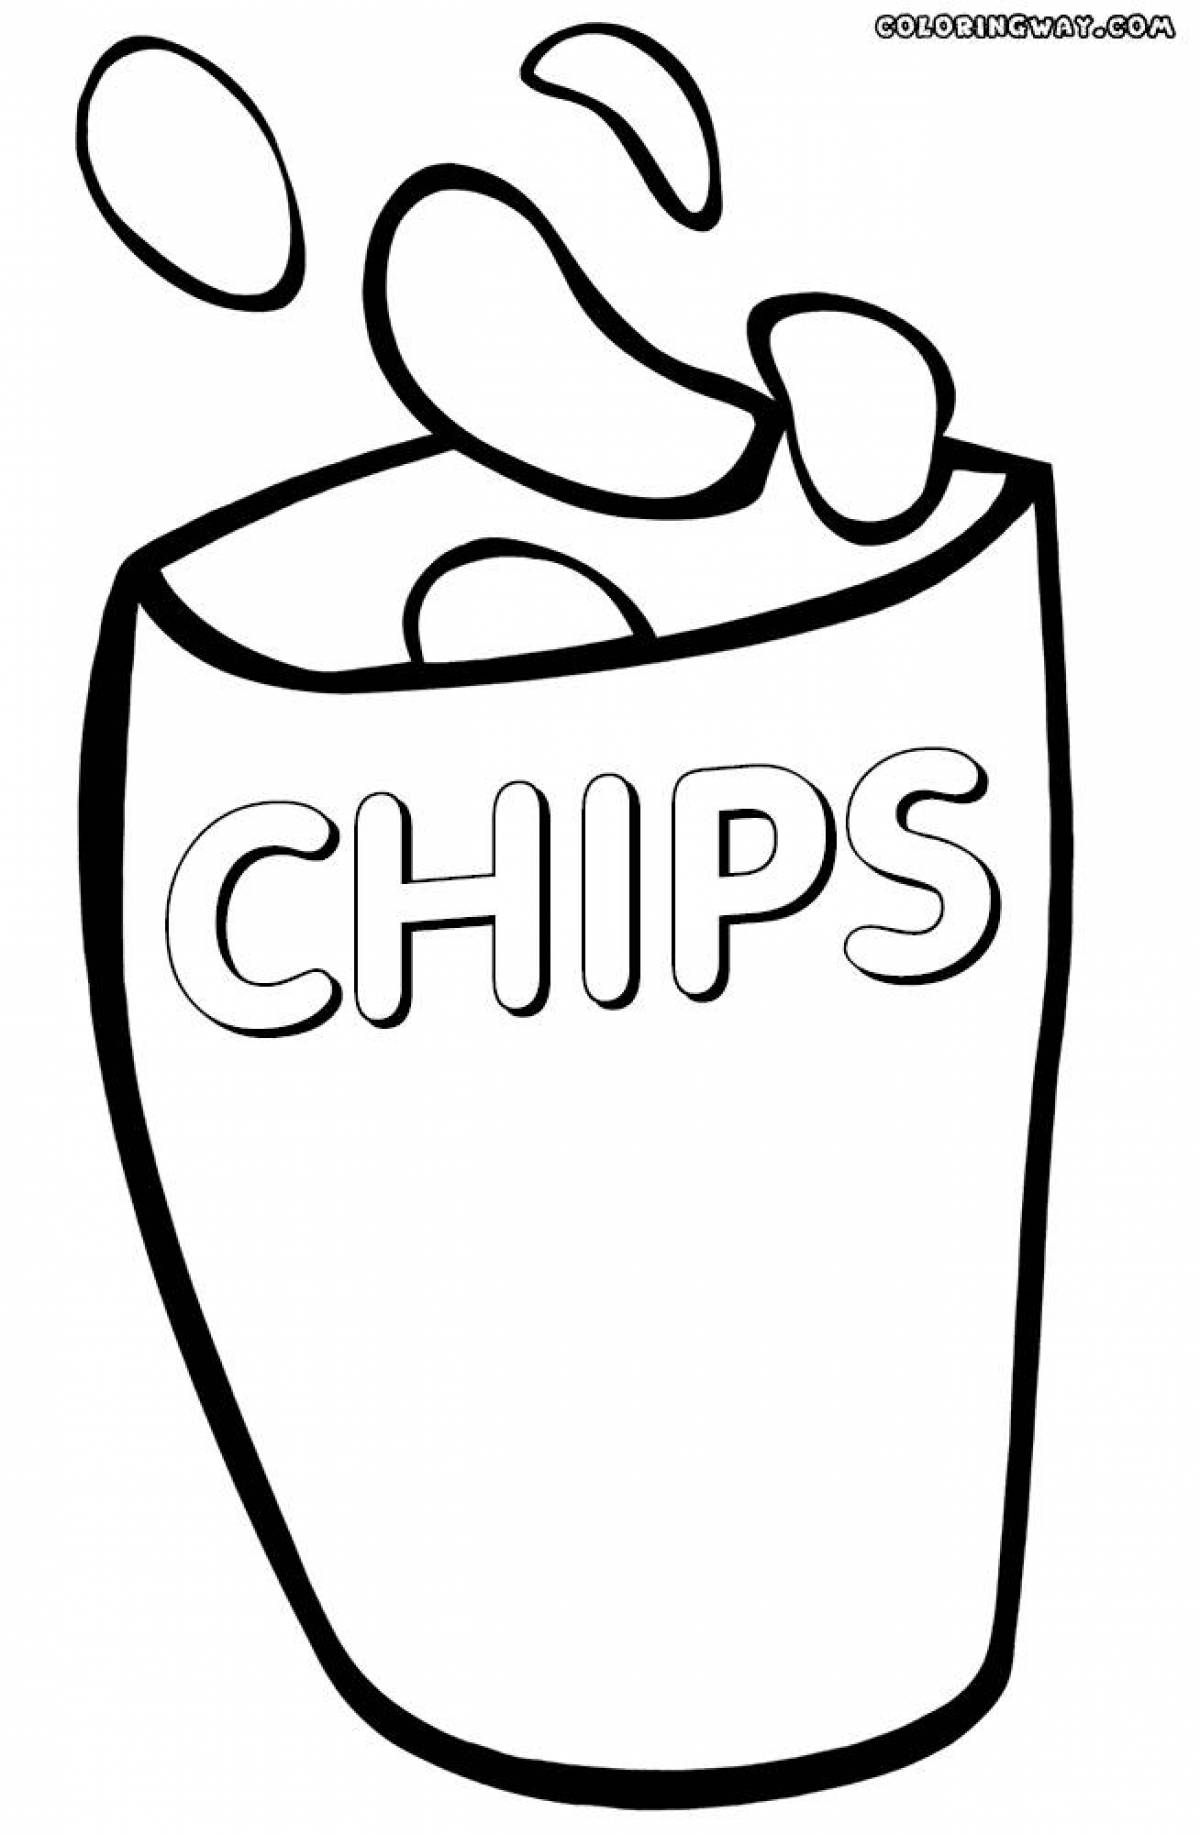 Chips #2